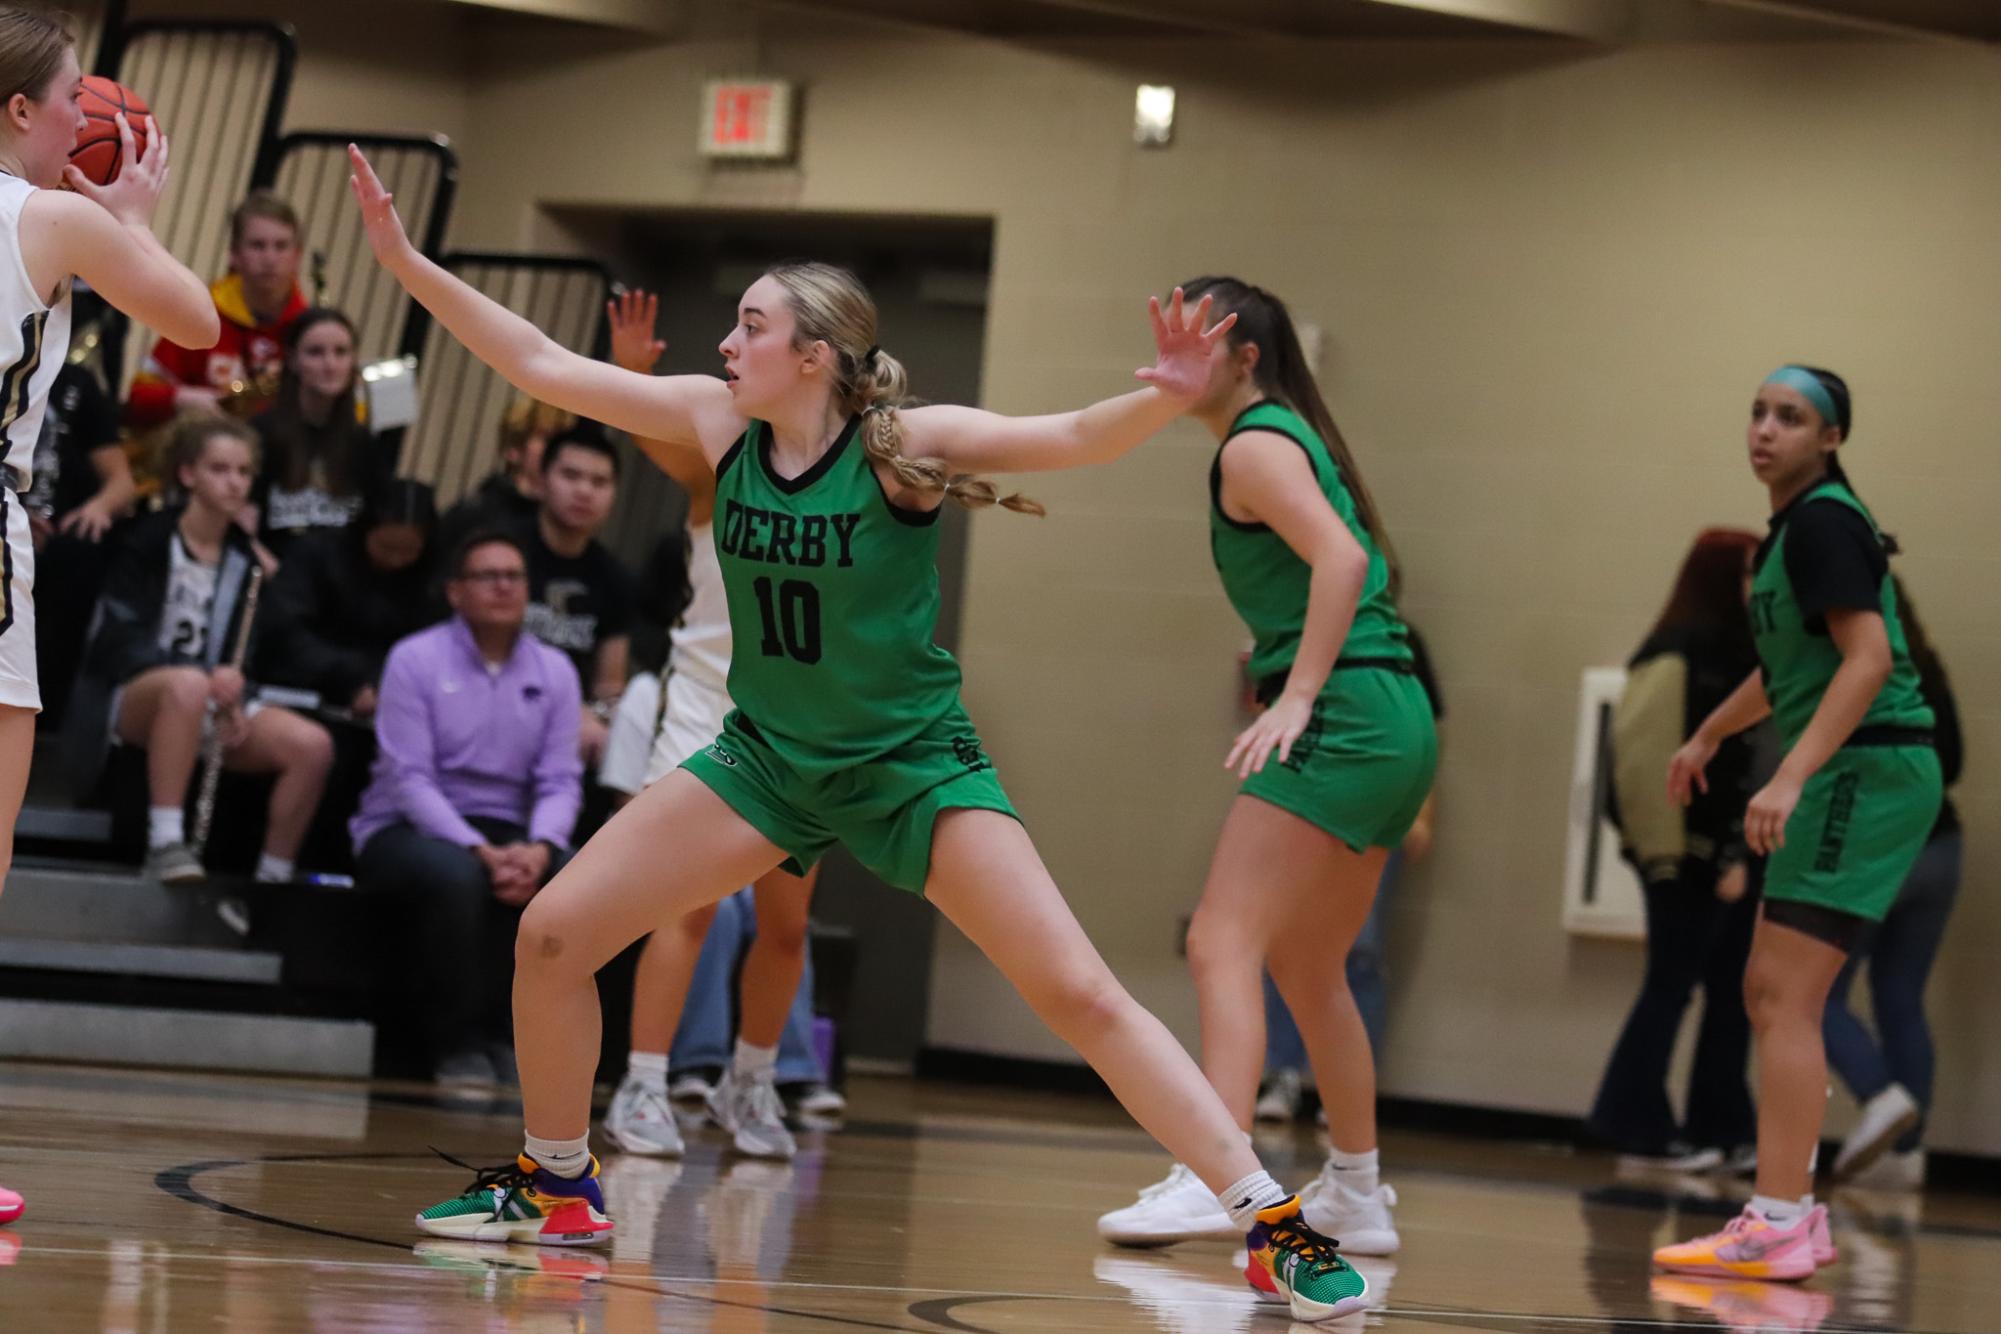 Girls+Basketball+vs+Maize+South+%28Photos+By+Liberty+Smith%29